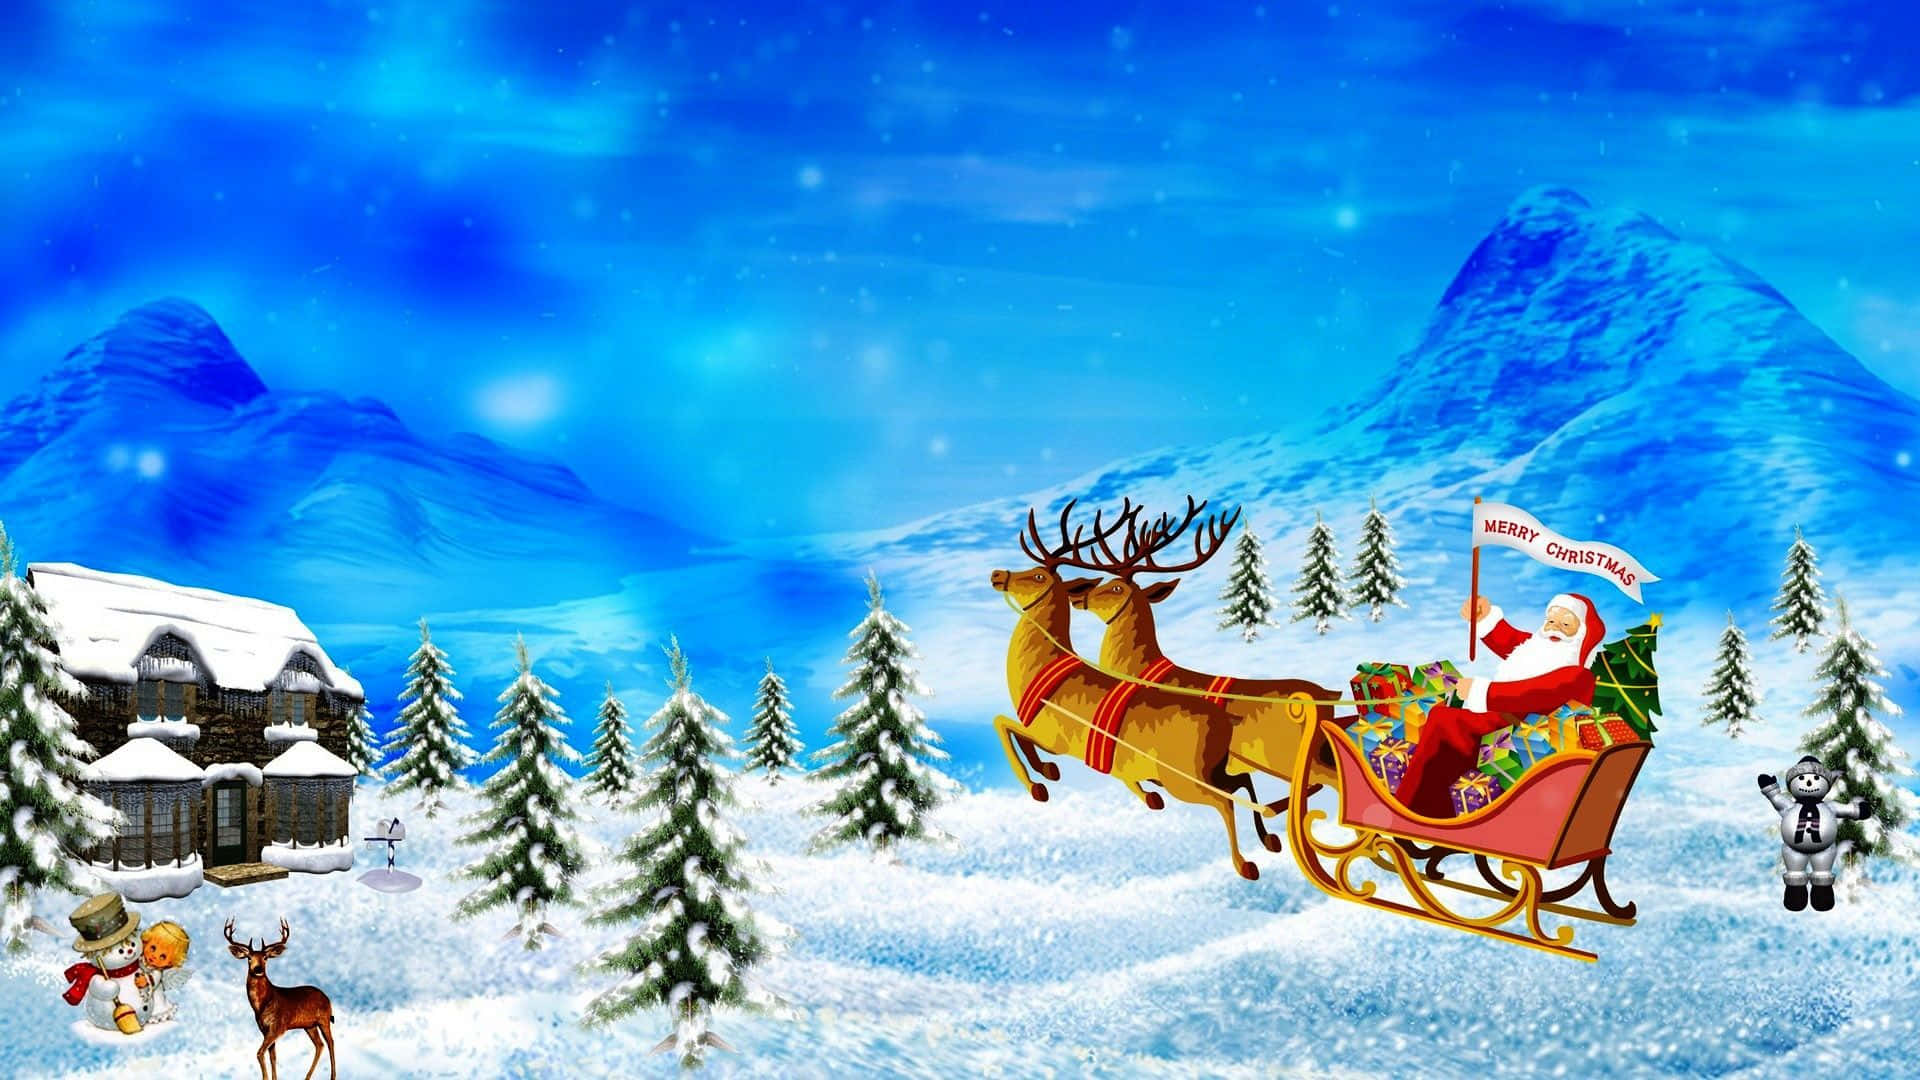 100+] Free Christmas Background s 